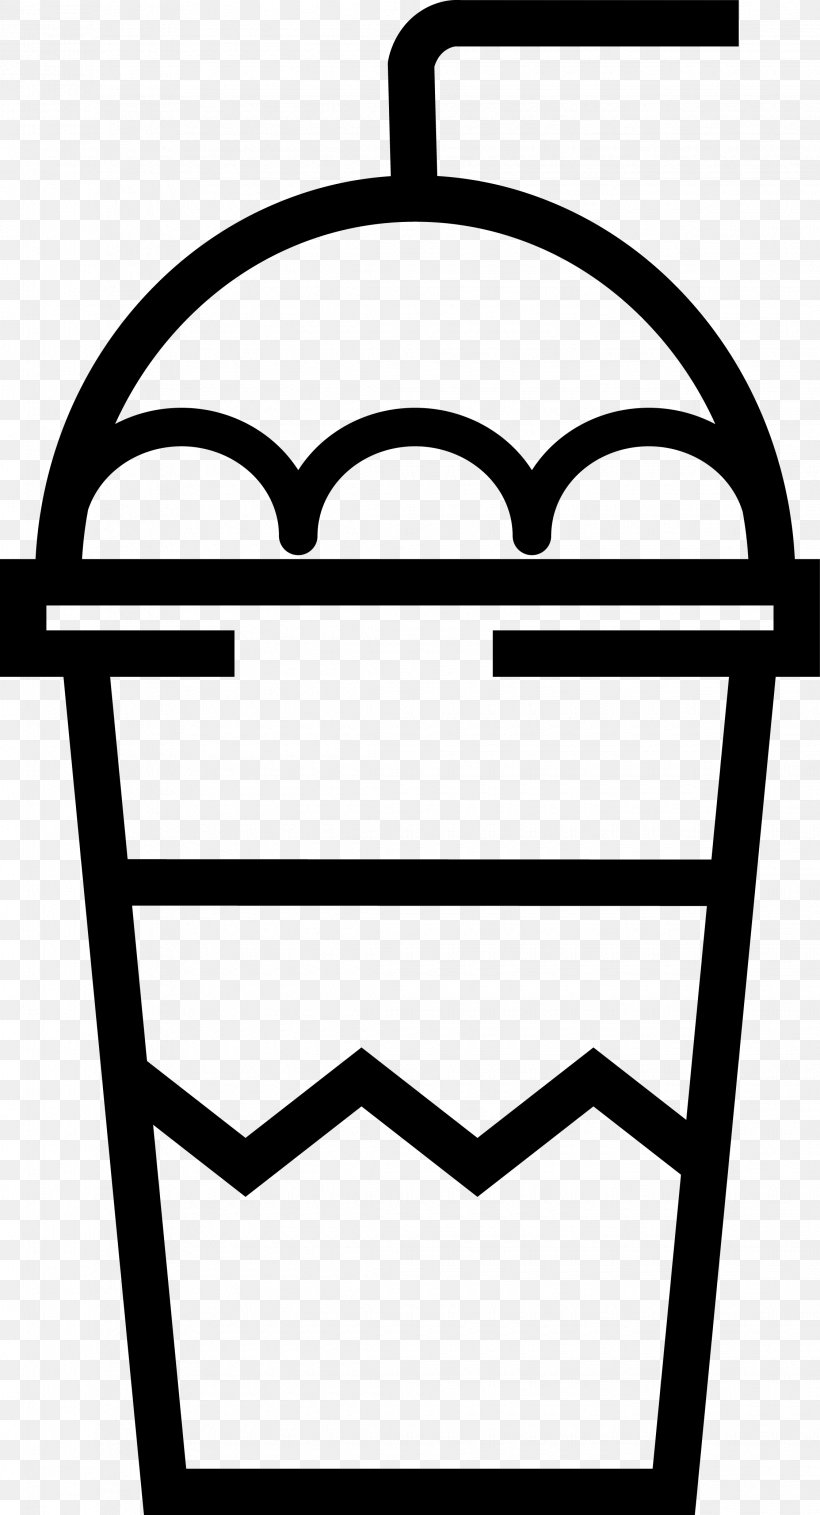 Coffee Cafe Beverages Frappuccino Clip Art, PNG, 2245x4150px, Coffee, Artwork, Bar, Beverages, Black And White Download Free